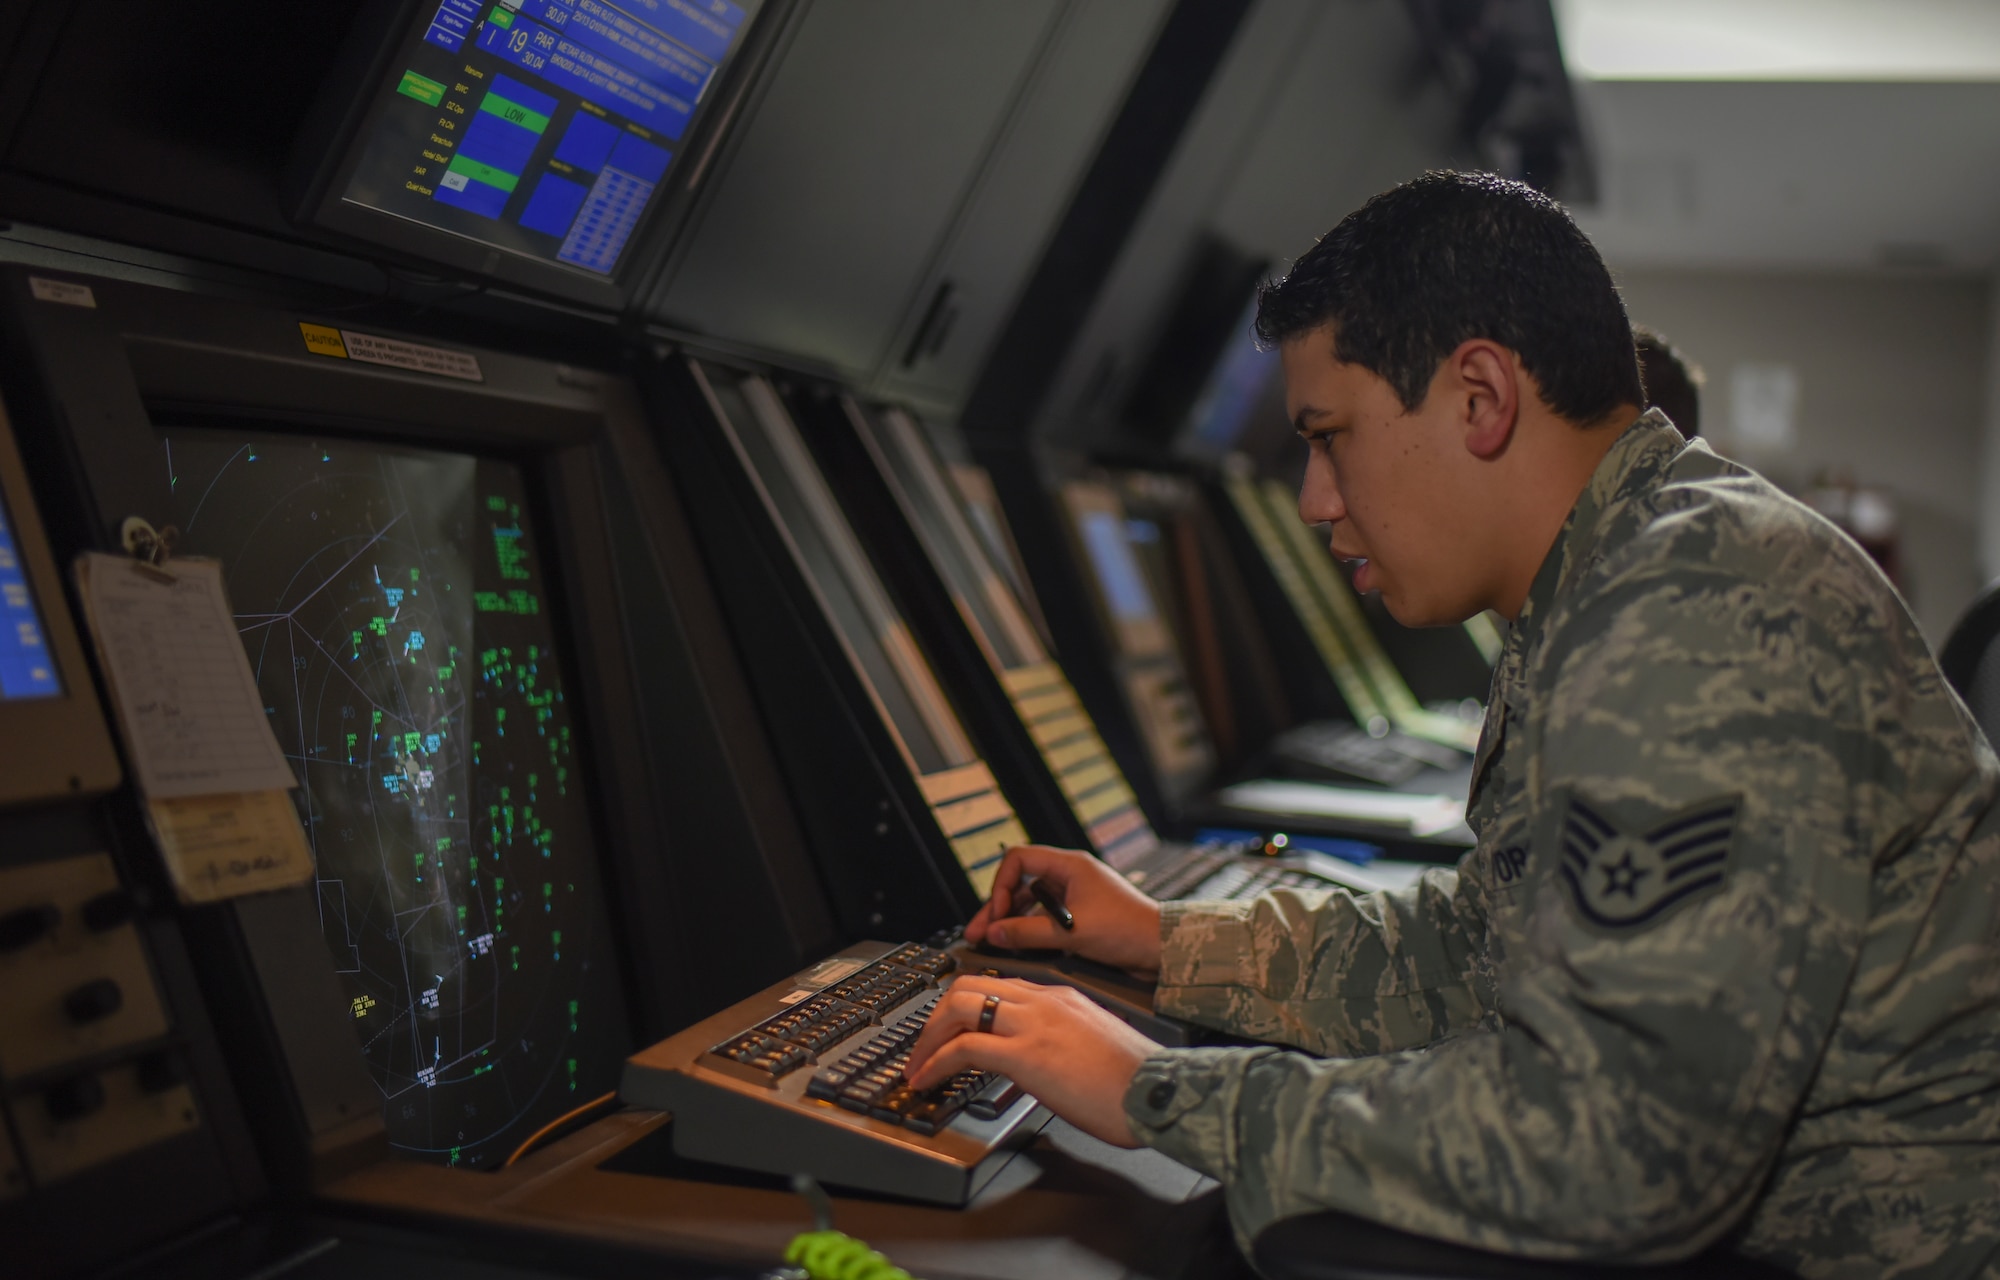 Staff Sgt. Christopher Palacio, 374th Operations Support Squadron air traffic control specialist, operates an approach control station as he separates, sequences and directs aircraft into five different Japanese and U.S. military bases throughout the region at Yokota Air Base, Japan, May 8, 2015. Palacio works in the radar approach control section of the tower, which can monitor and control aircraft in an area of 20,000 square miles. (U.S. Air Force photo by Senior Airman Michael Washburn/Released)